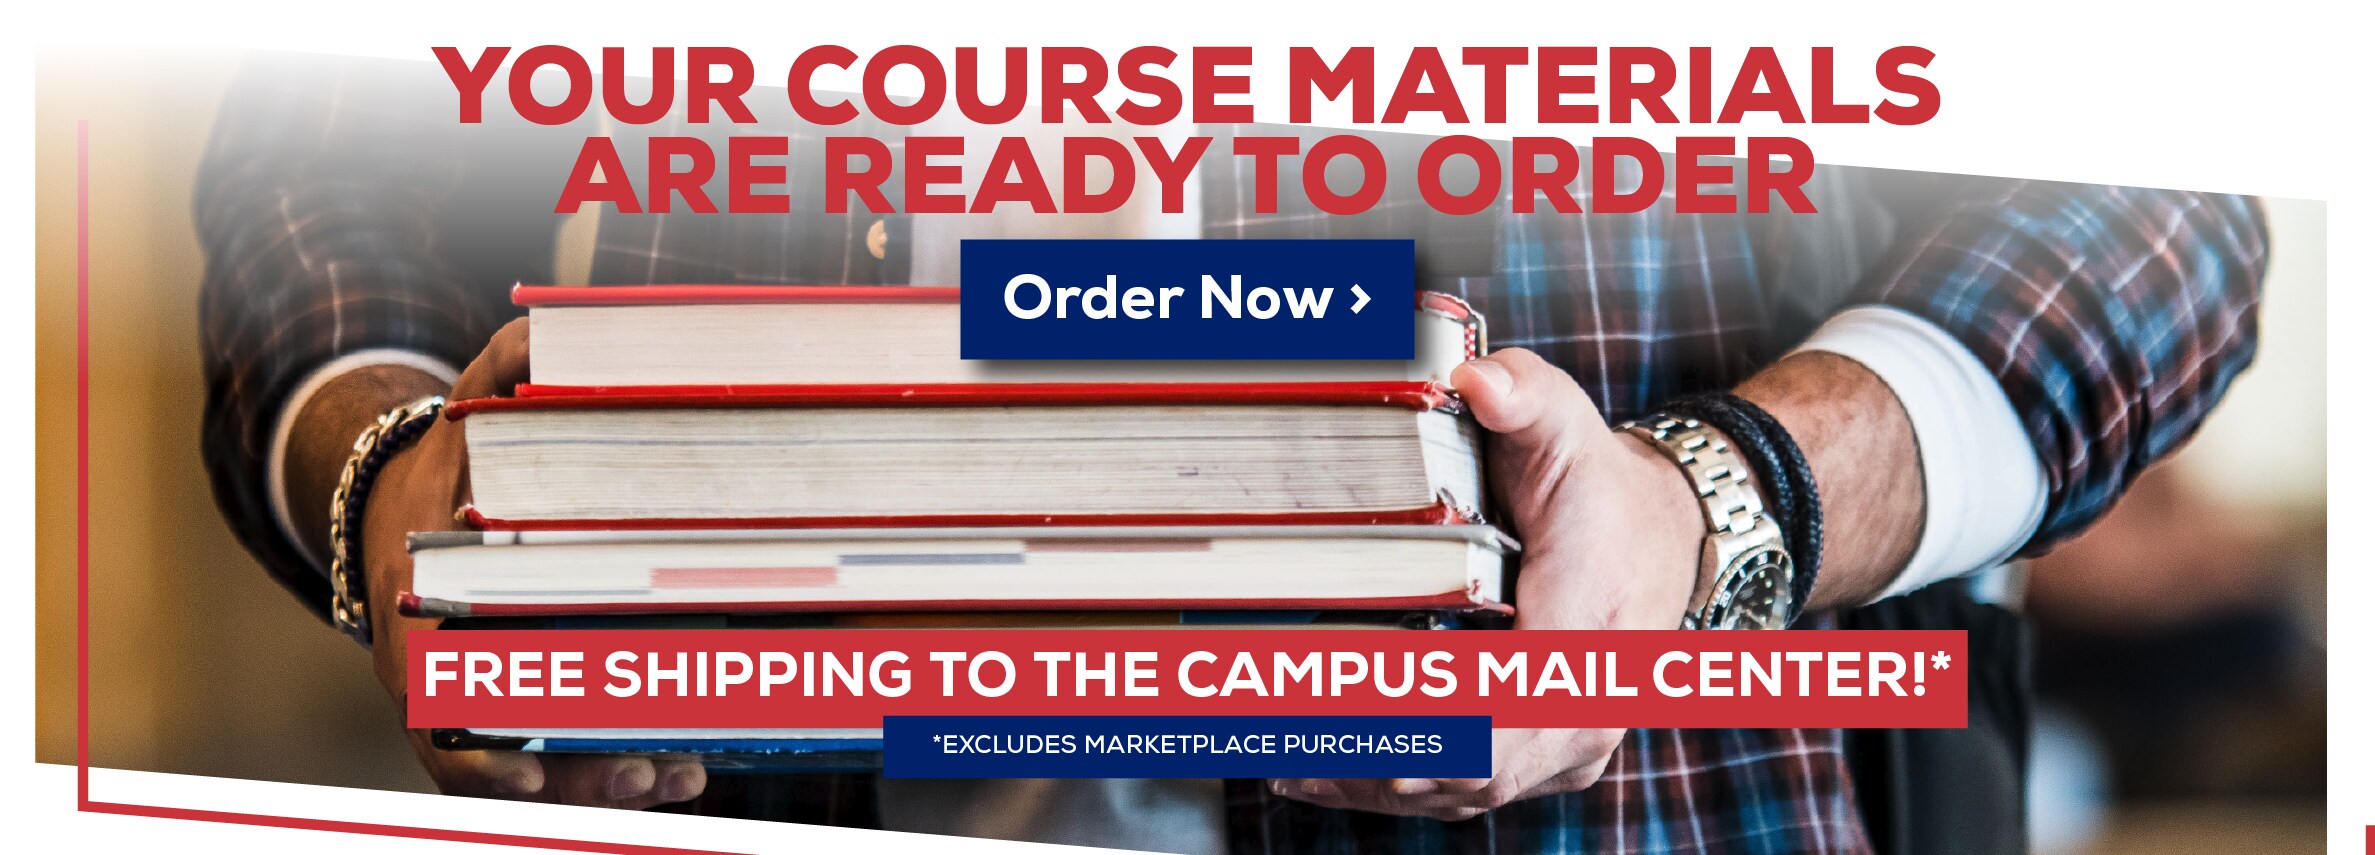 Your Course Materials are Ready to Order. Order Now. Free shipping to campus mail center! *Excludes marketplace purchases.